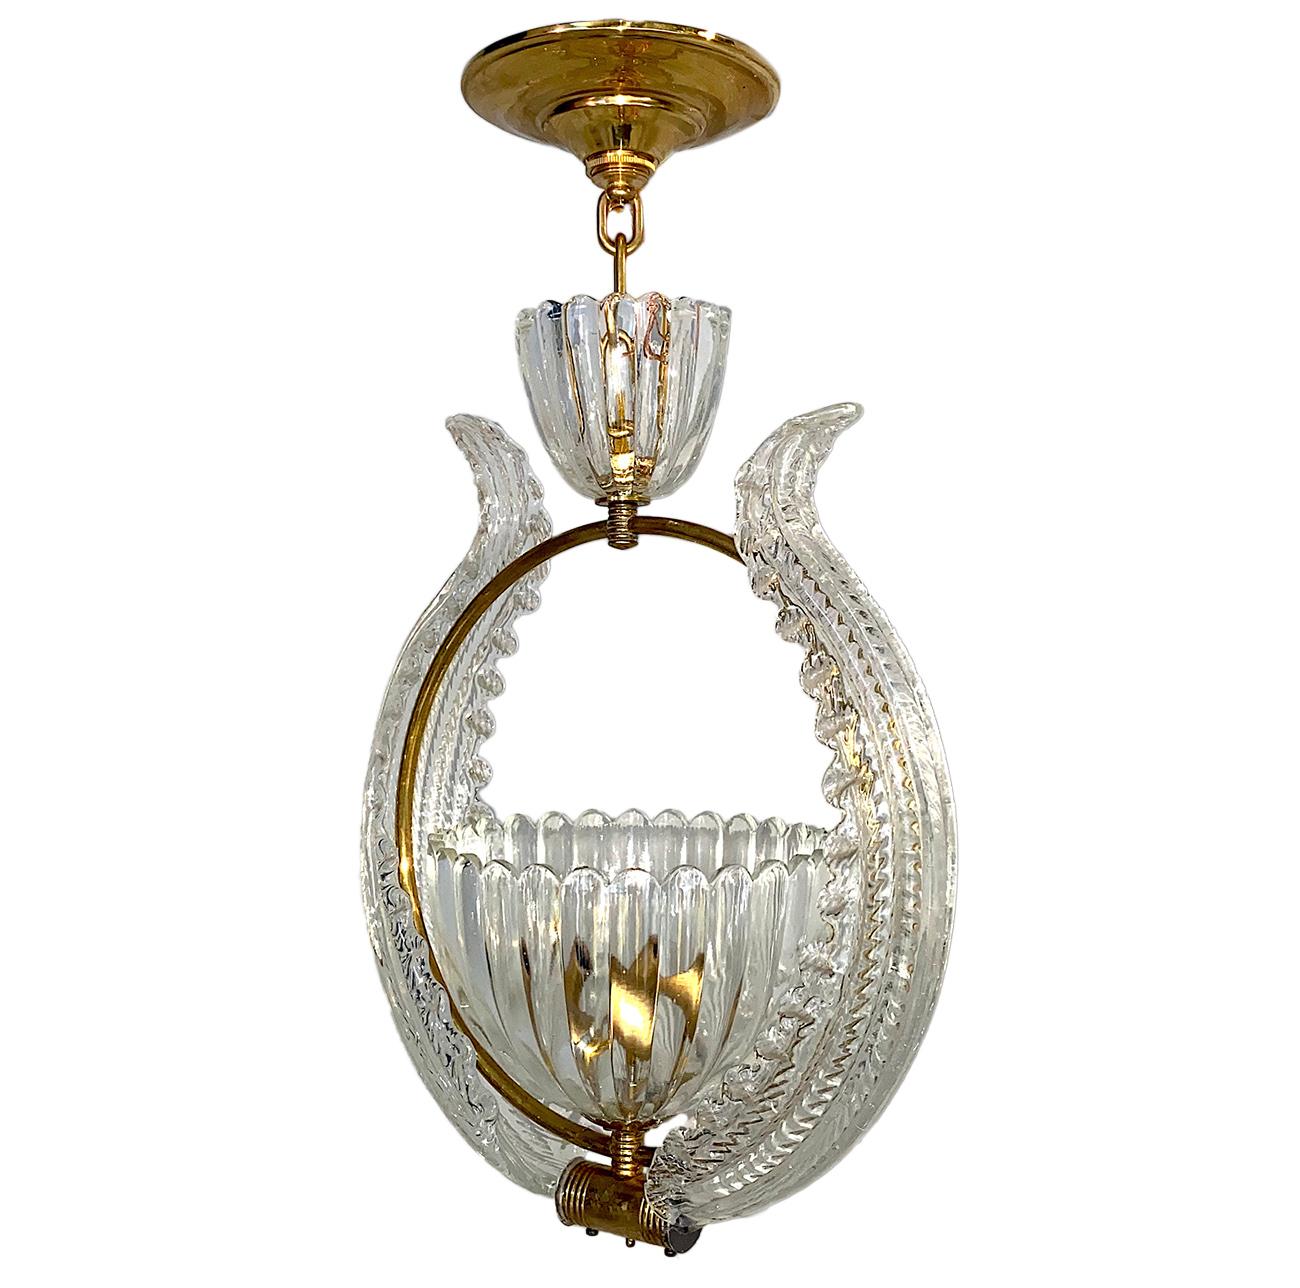 A circa 1940s Italian blown glass light fixture with two interior candelabra lights.

Measurements:
Drop 18.5